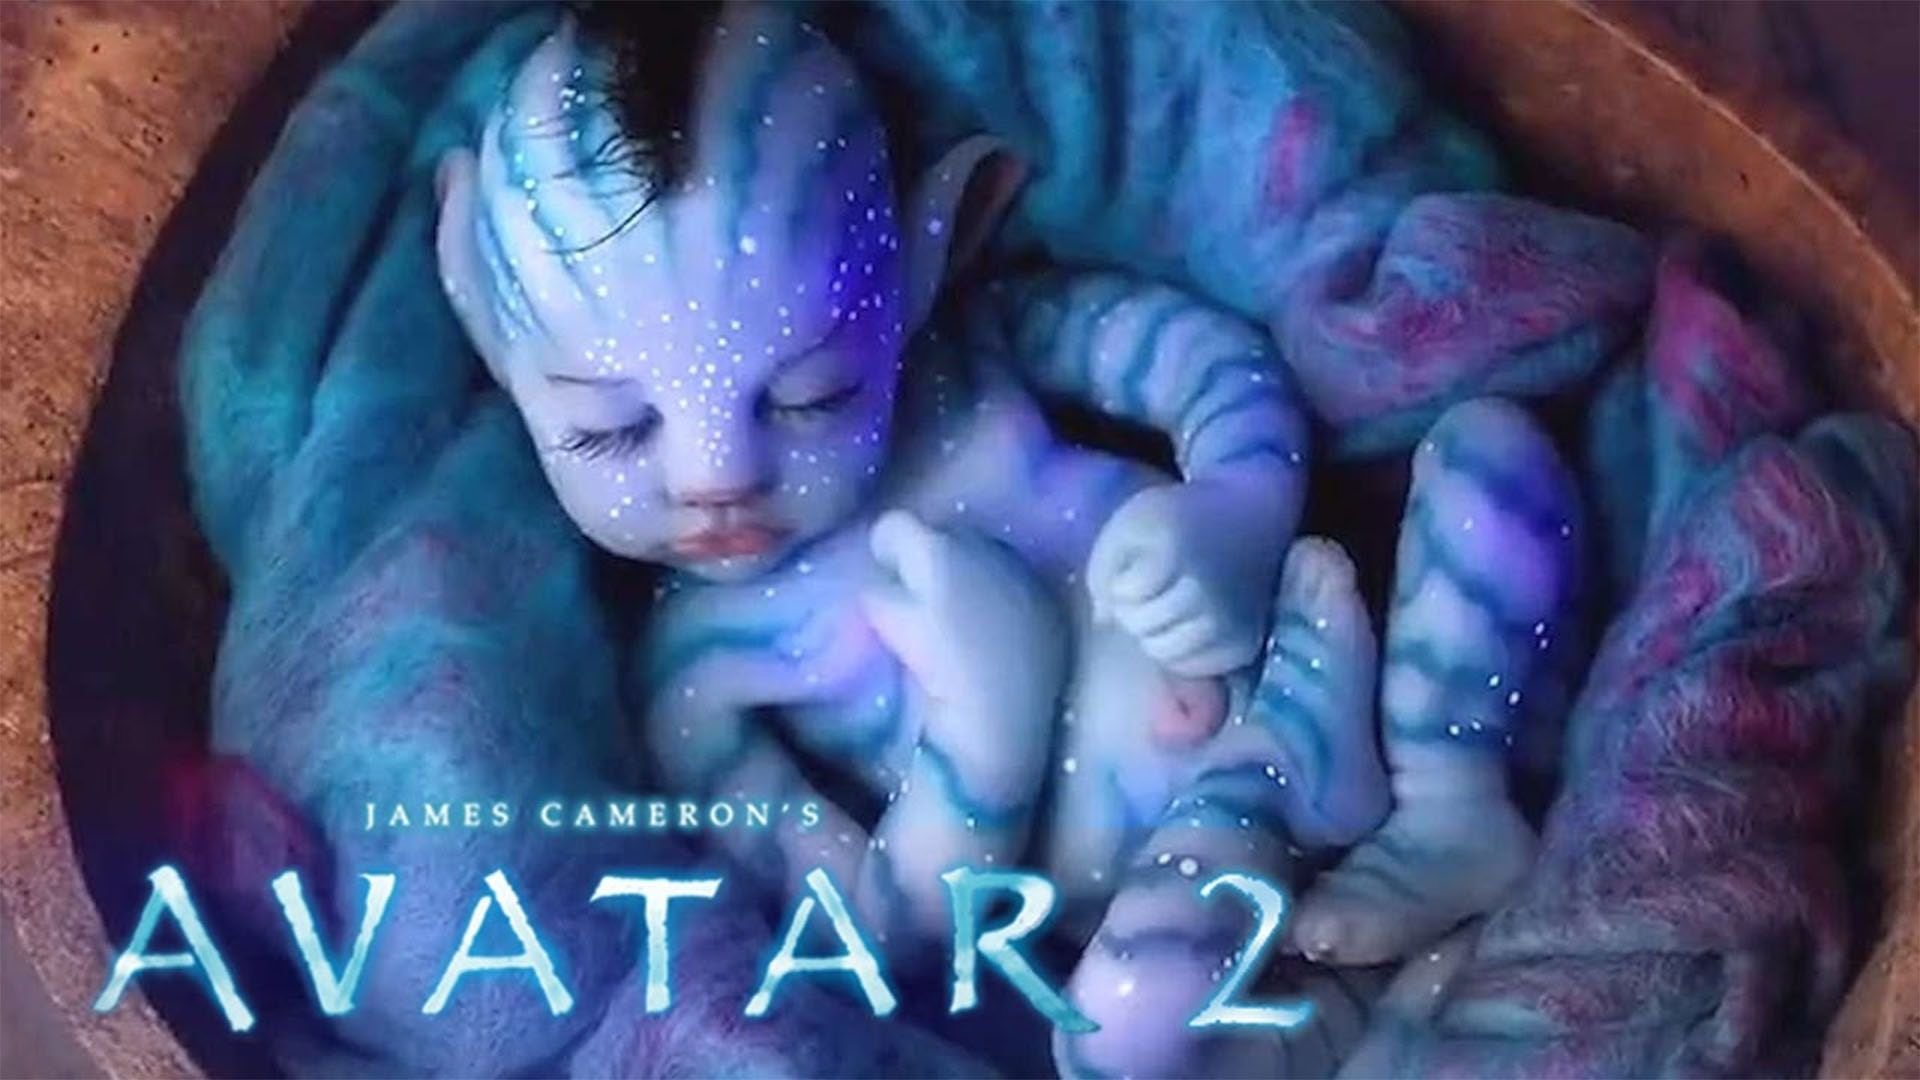 how exactly is this movie similar in any way to avatar   rAvatar